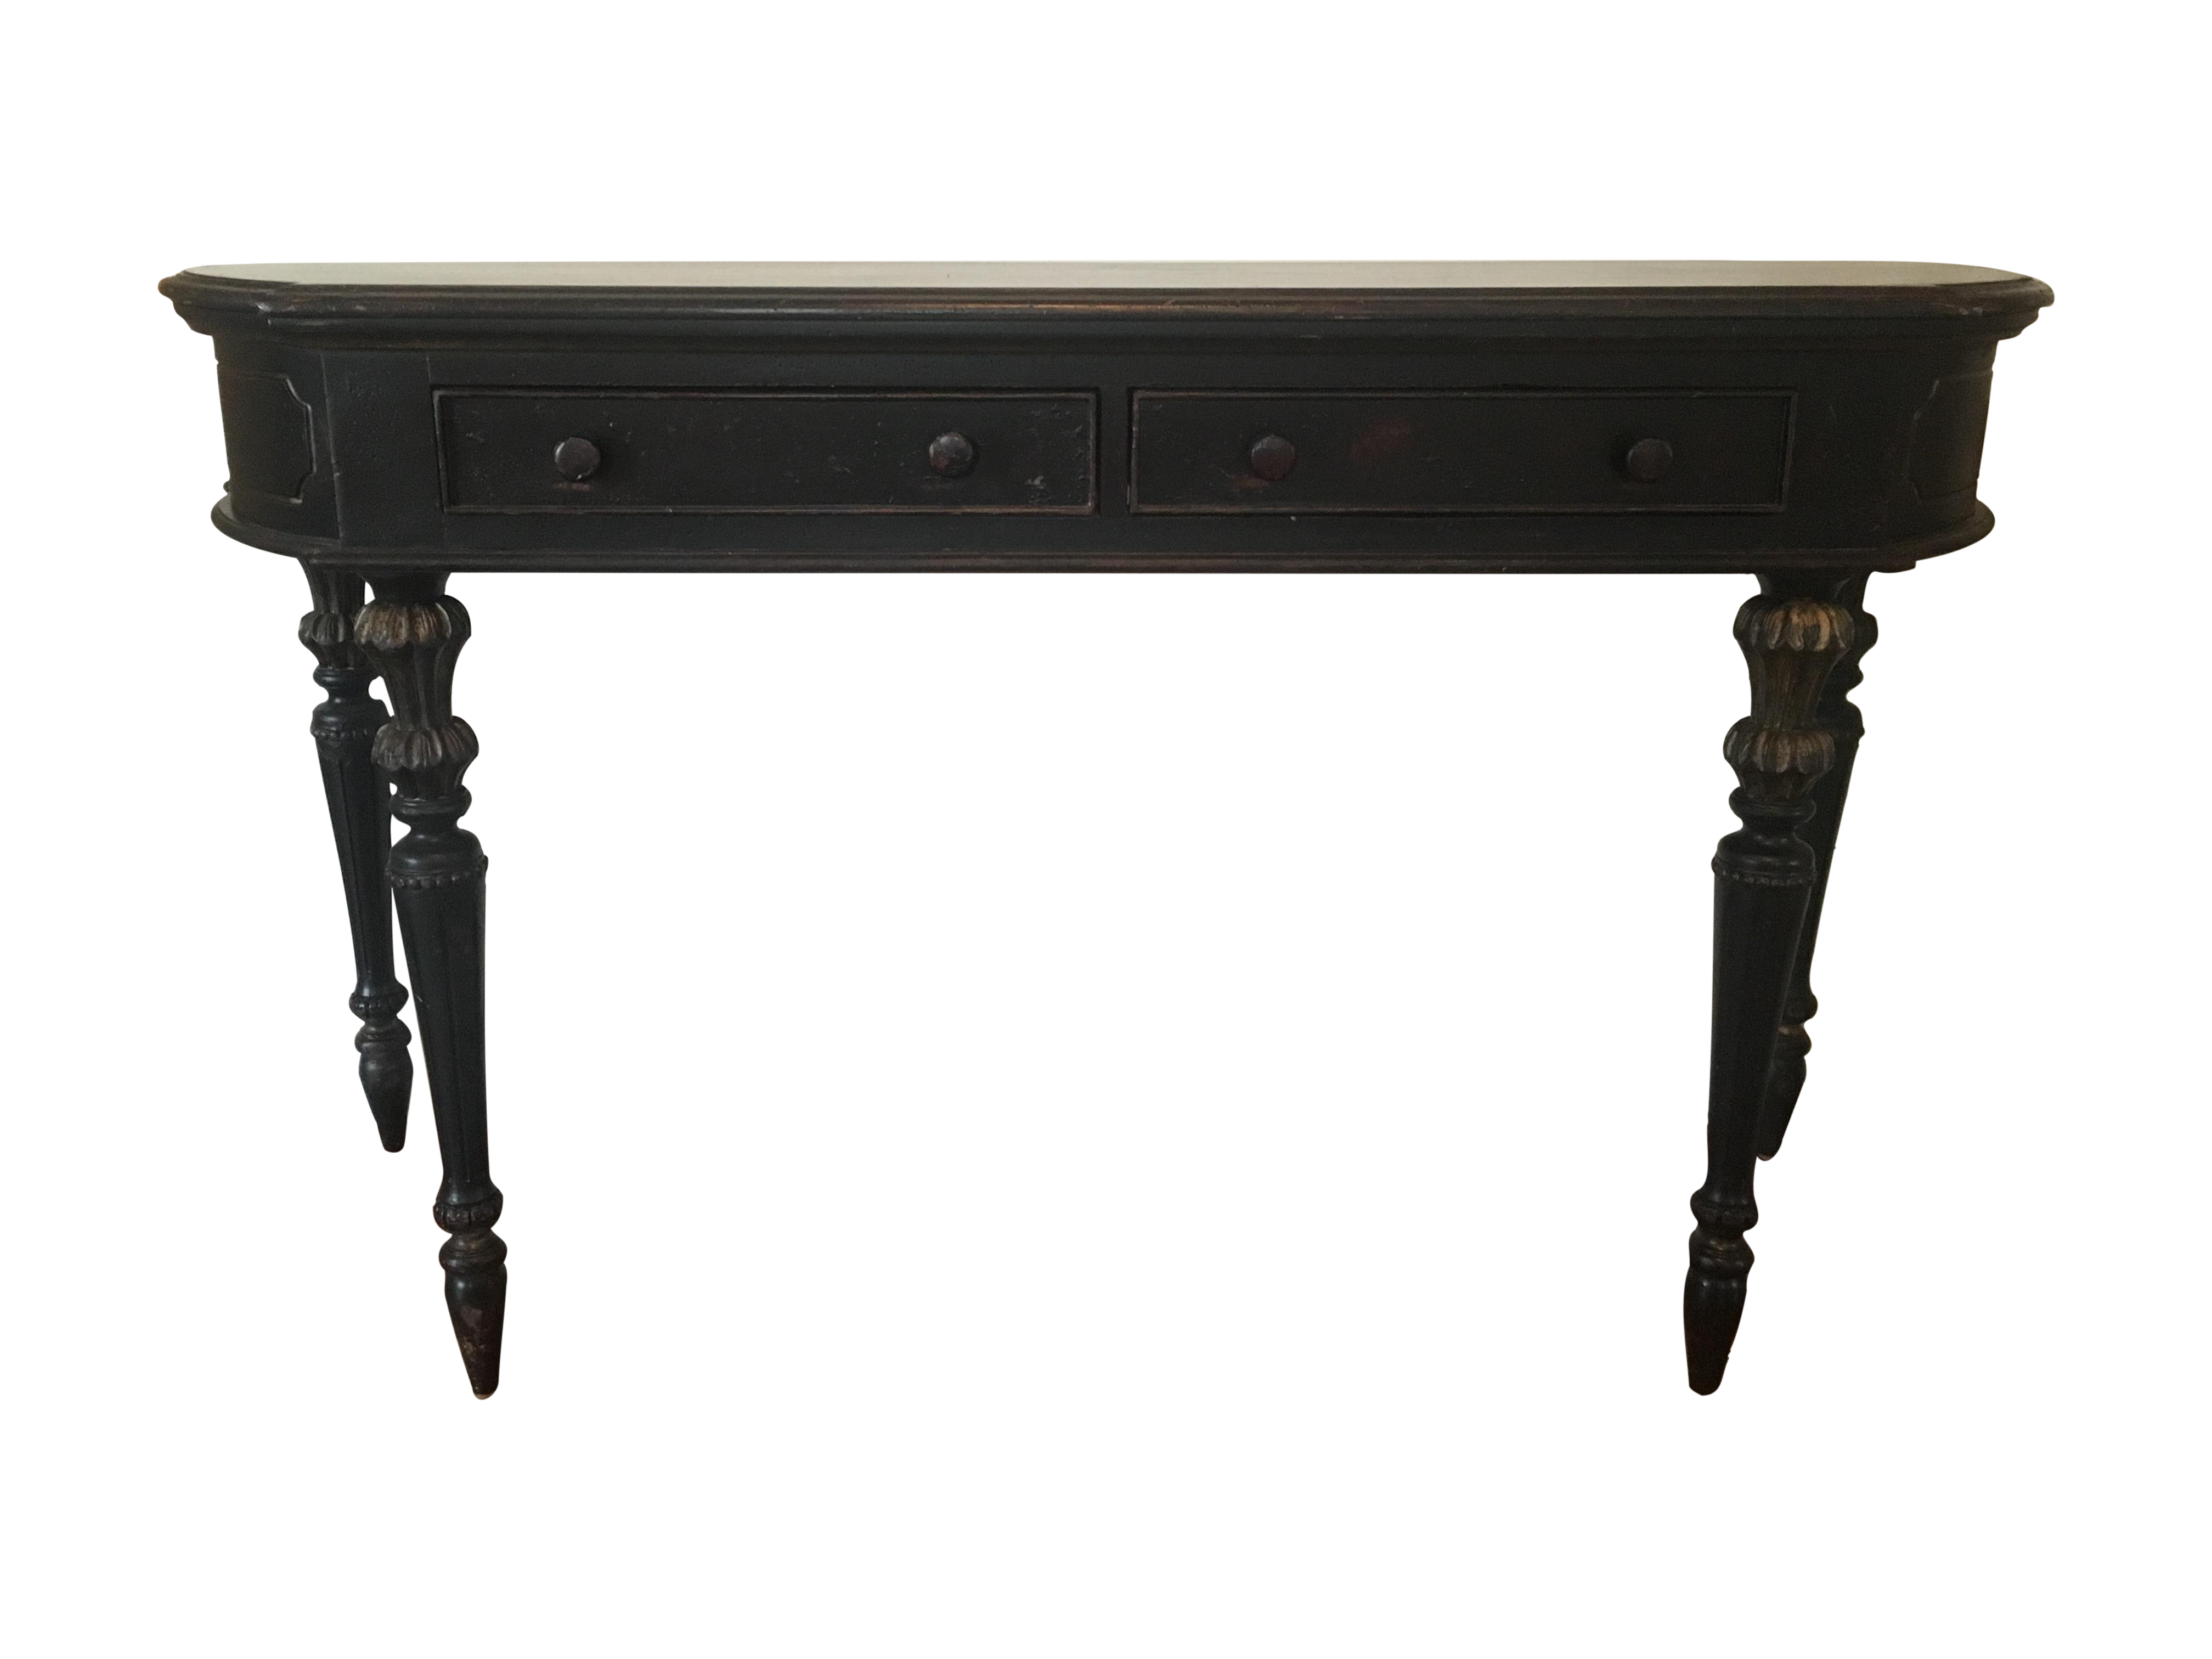 versatile black with gold accent console table great statement piece front hall very sturdy well built glass bedside nursery end retro couch bohemian coffee curved patio umbrella